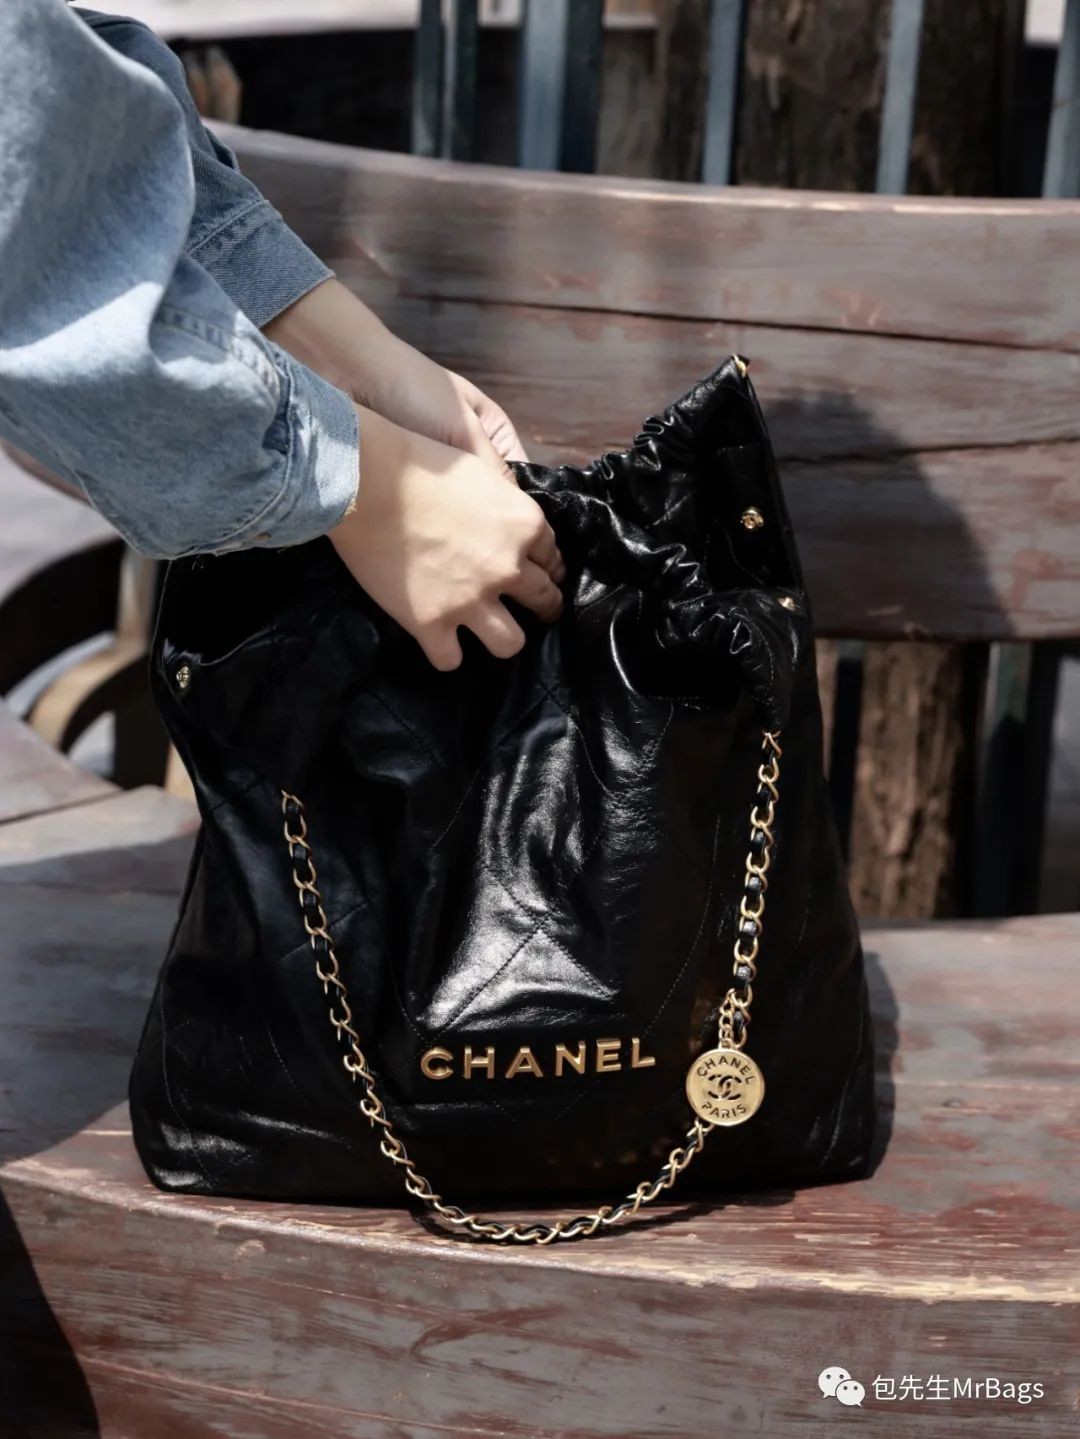 Chanel’s most popular Chanel 22 top quality replica bags (2022 updated)-Best Quality Fake Louis Vuitton Bag Online Store, Replica designer bag ru